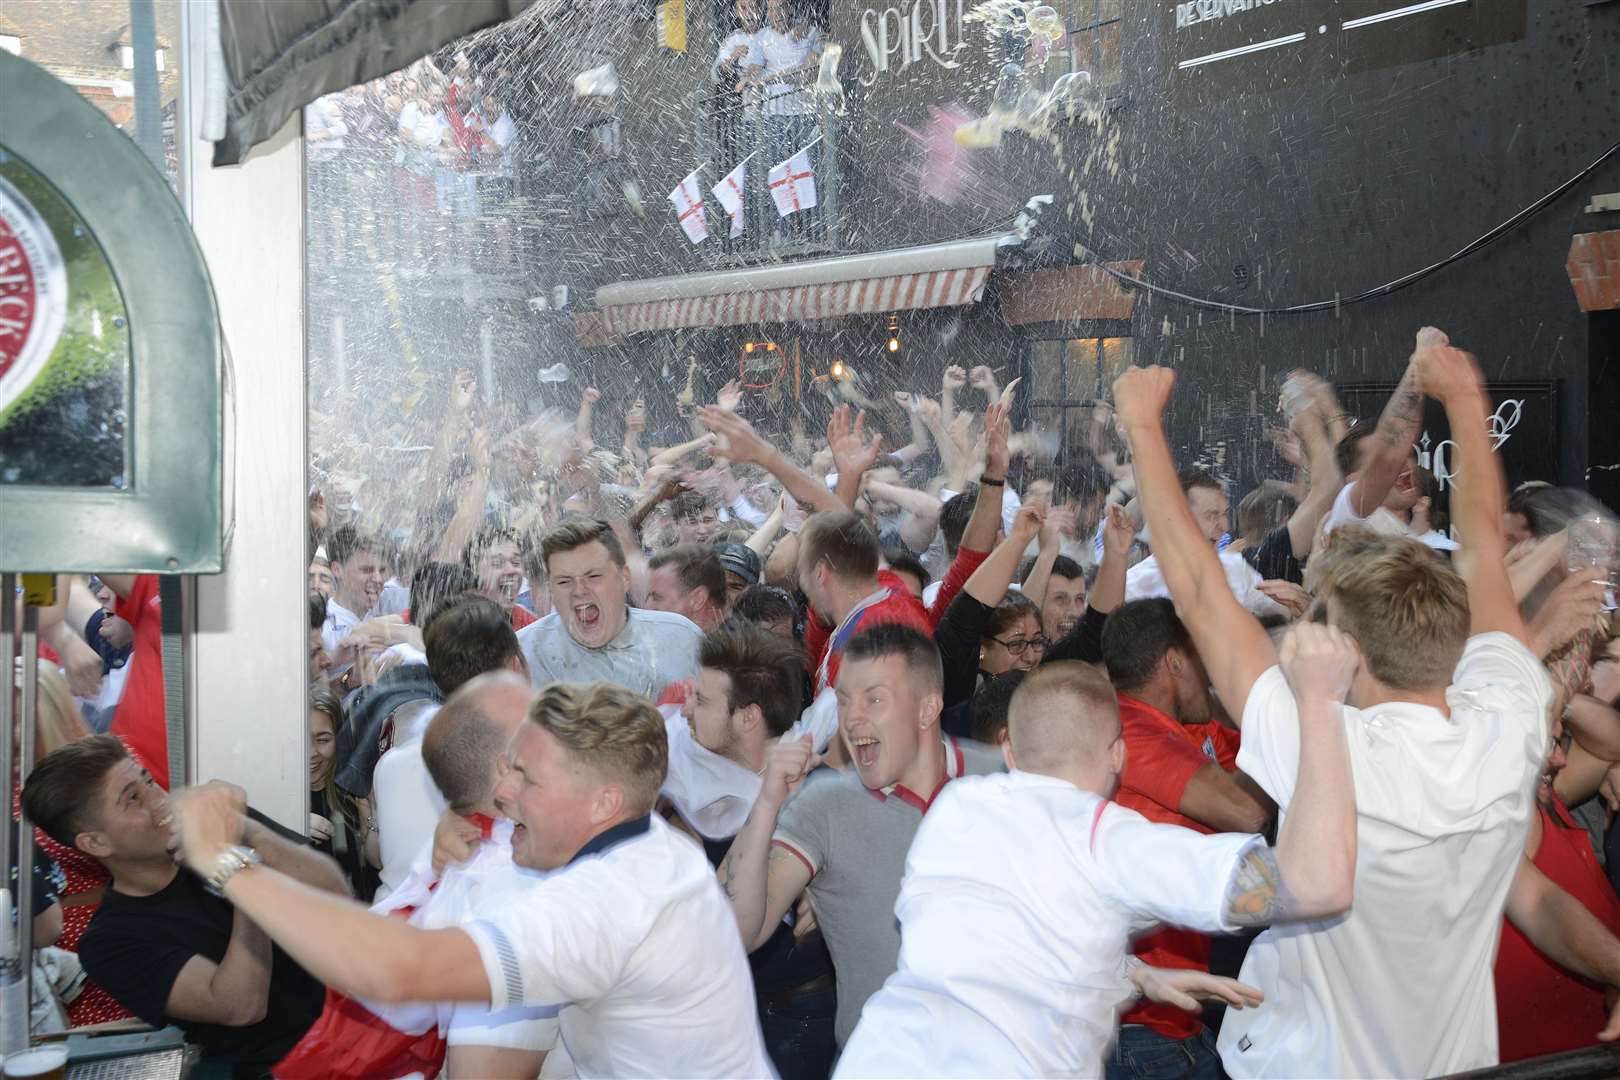 England fans celebrate at the Source Bar in the 2018 World Cup.Picture: Paul Amos